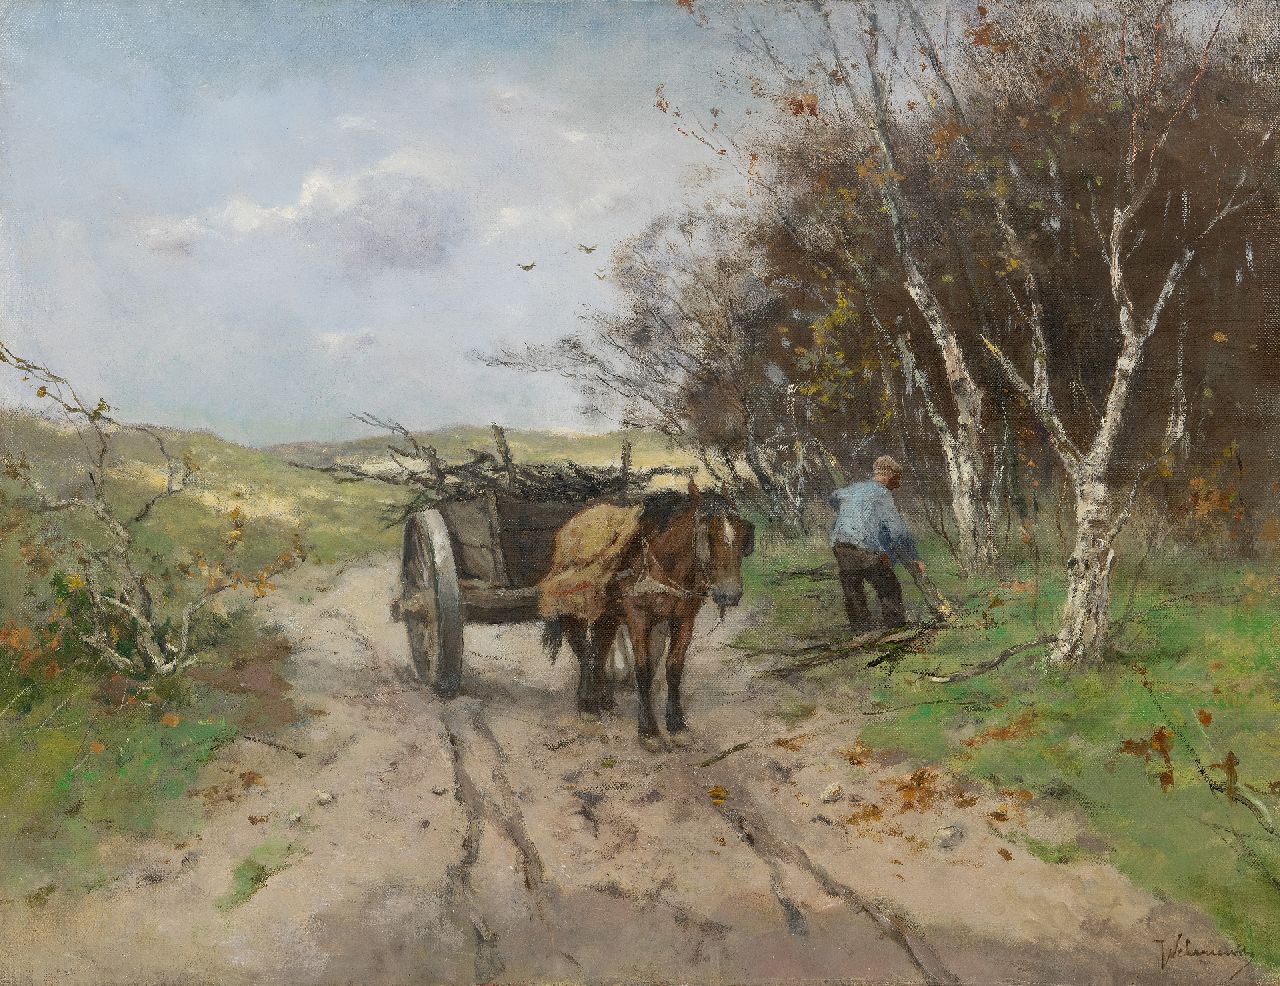 Scherrewitz J.F.C.  | Johan Frederik Cornelis Scherrewitz | Paintings offered for sale | Collecting wood with a horse cart in a dune landscape, oil on canvas 50.0 x 65.5 cm, signed l.r.